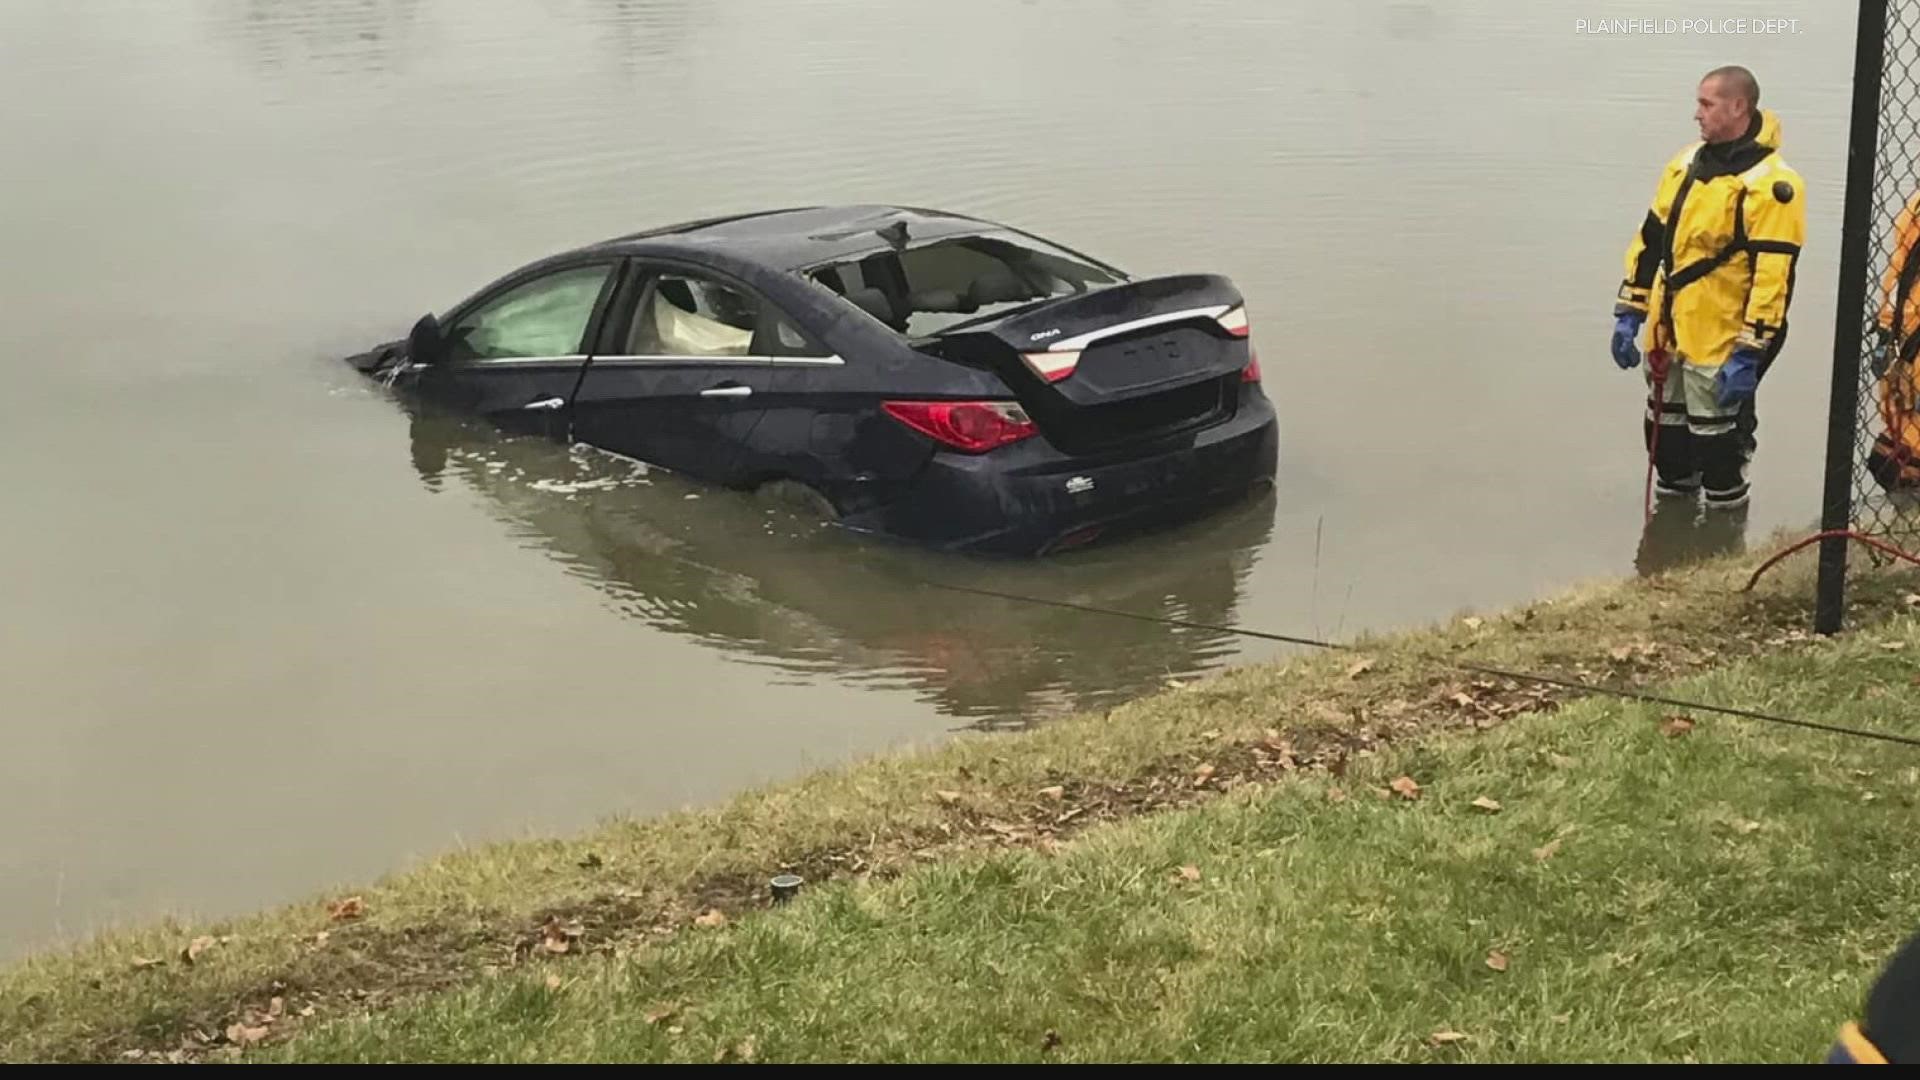 The car crashed through fence and into a pond off Perry Road Tuesday morning.